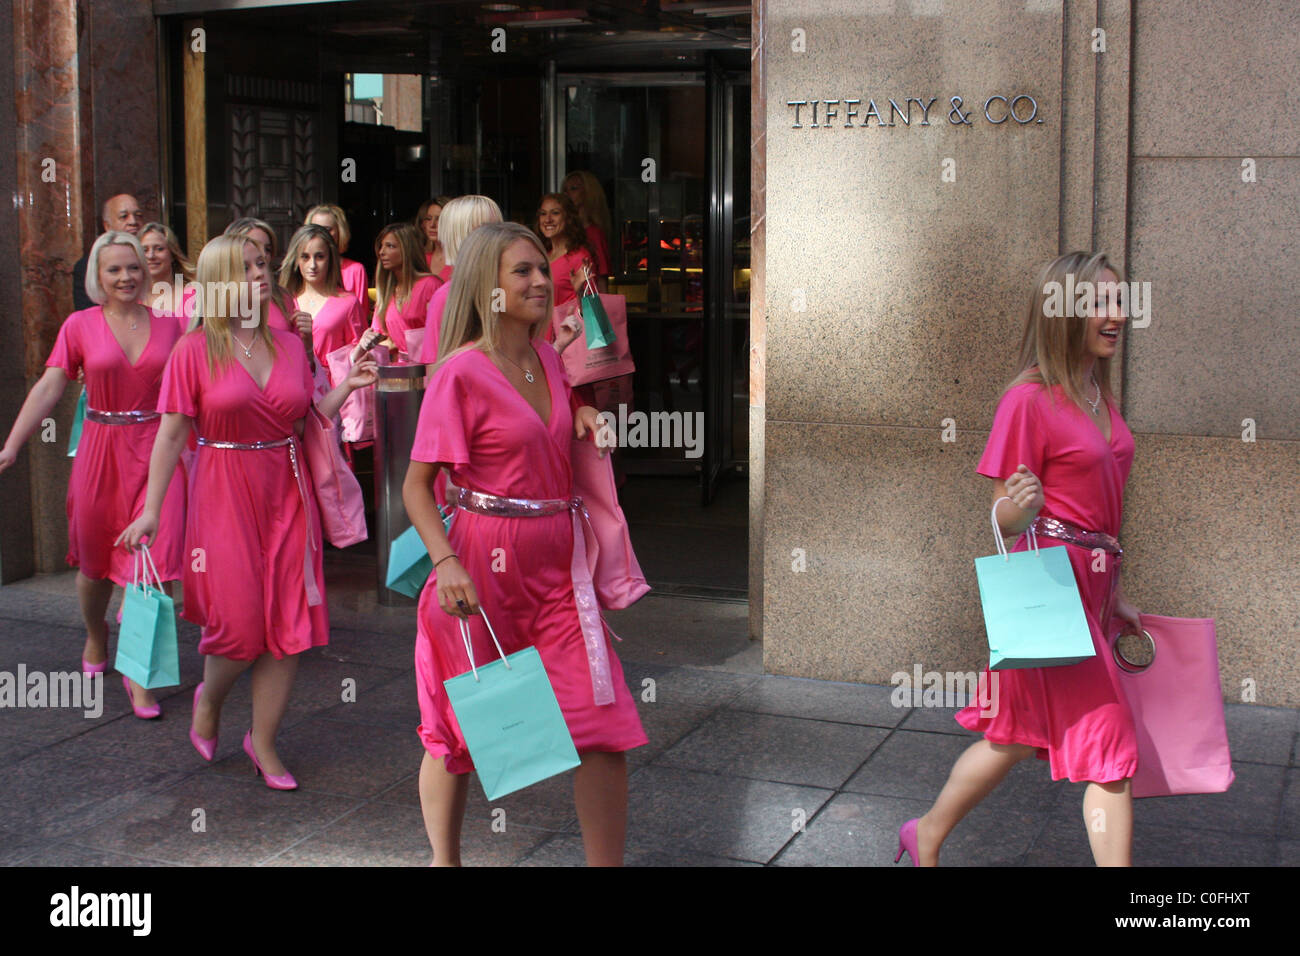 Legally Blonde models promote MTV's 'Legally Blonde The Musical: The Search for Elle Woods' at Tiffany & Co - Day 2 New York Stock Photo